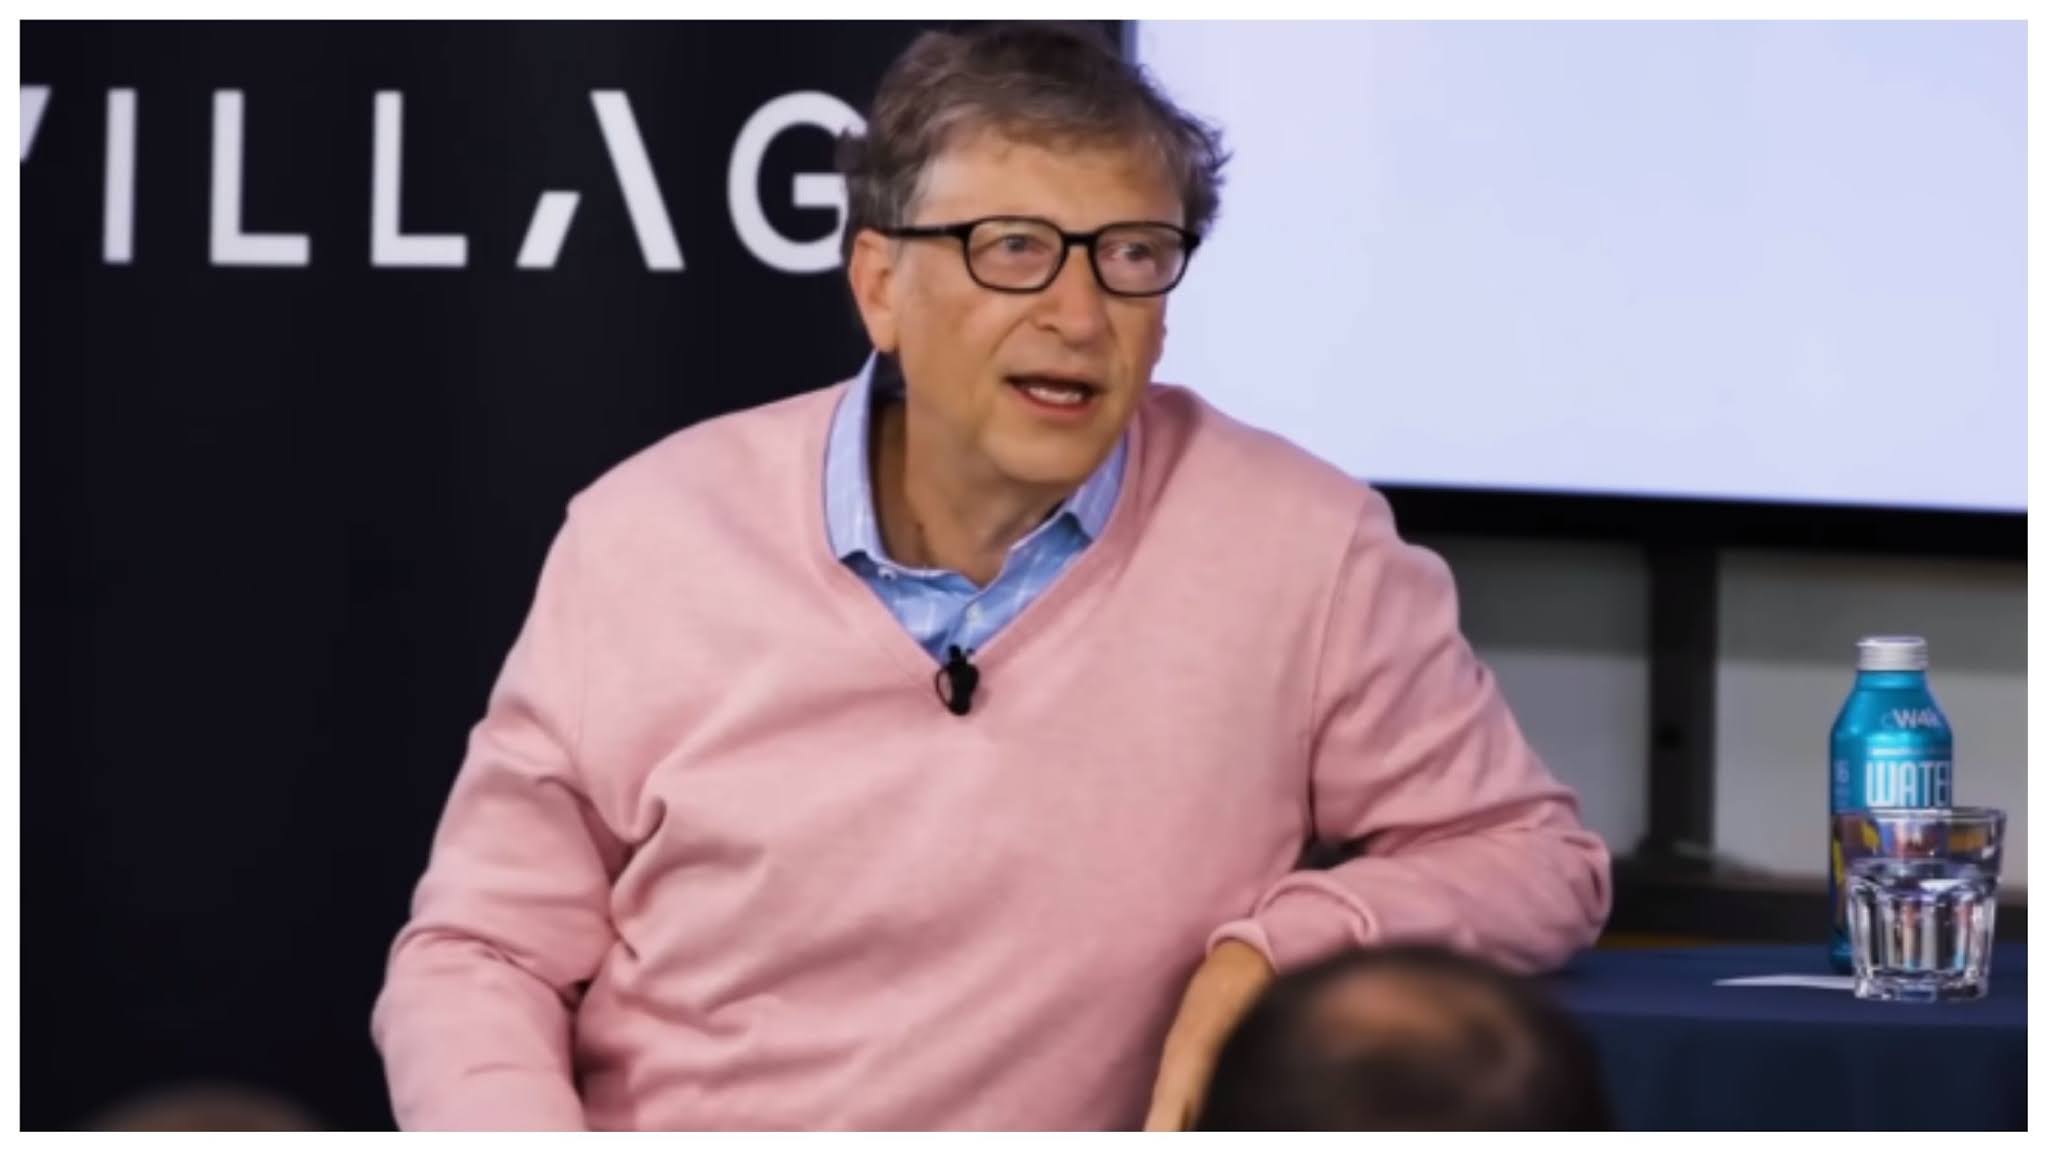 Bill Gates is working with Britain to develop green technology